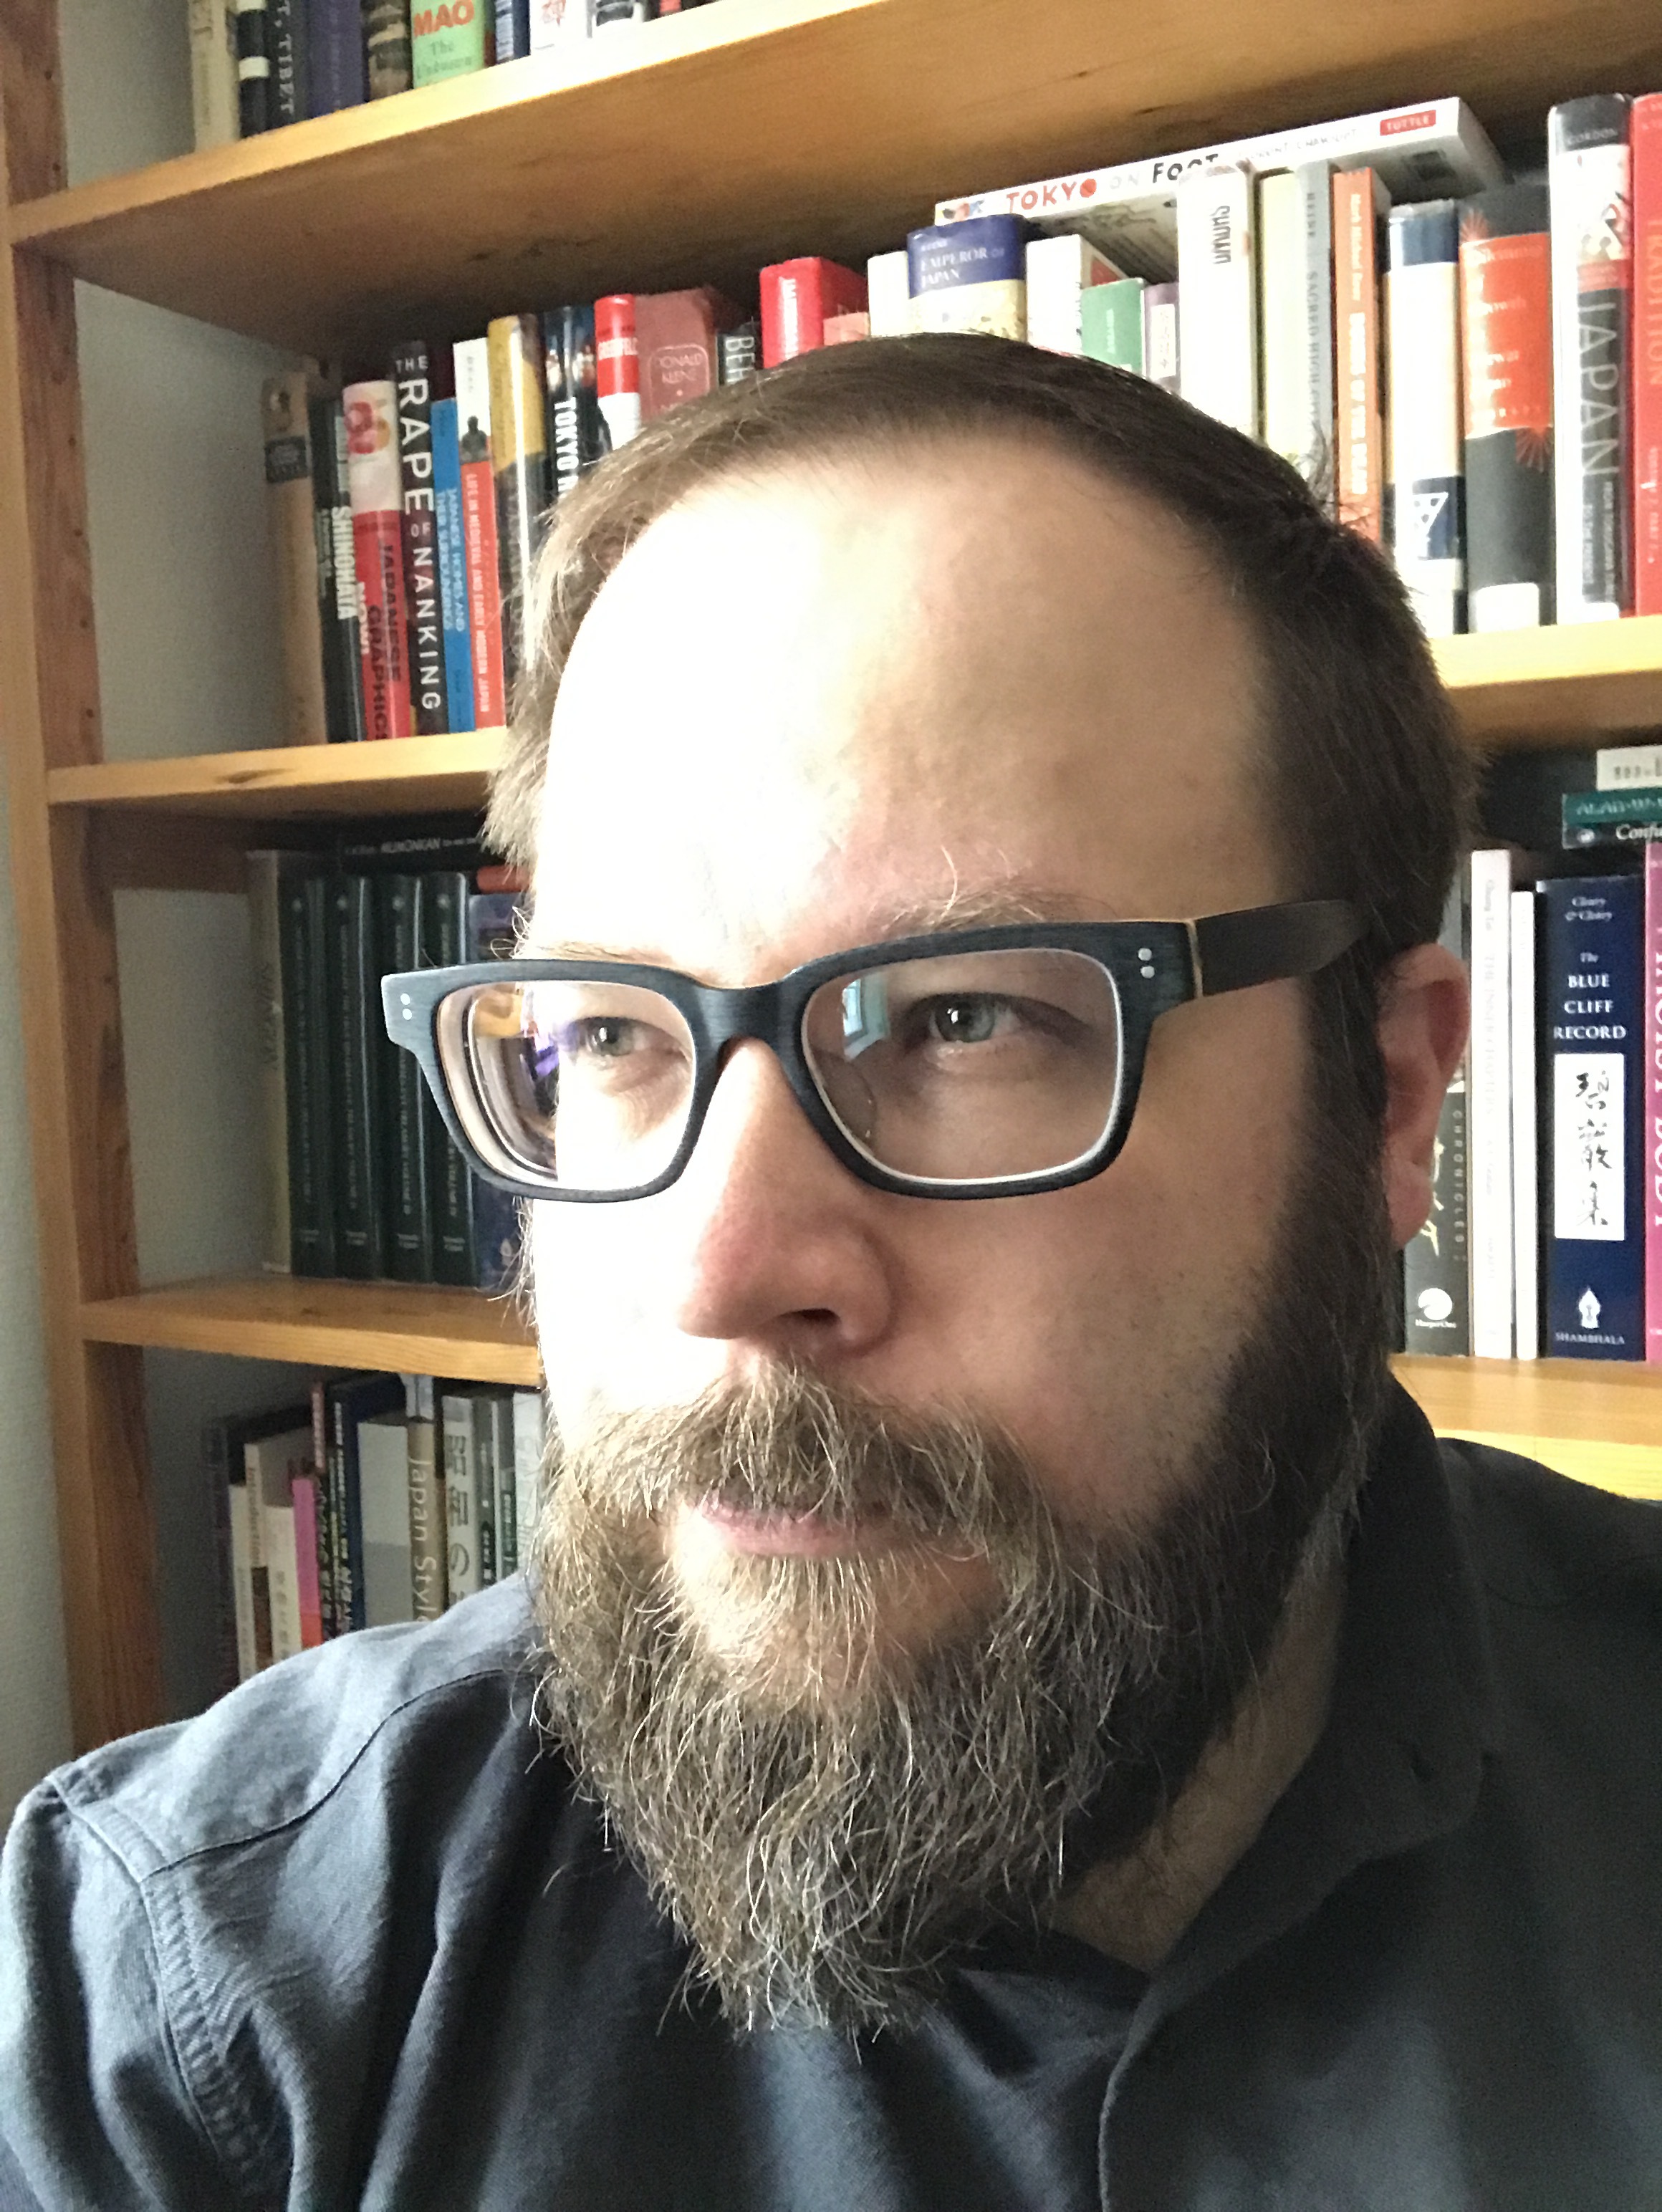 Niklas SödermanNiklas is a PhD candidate at Tallinn University. In his dissertation he examines the Subjectivity in the Philosophy of the Kyoto School. Niklas received the TIFO Fellowship in 2018.